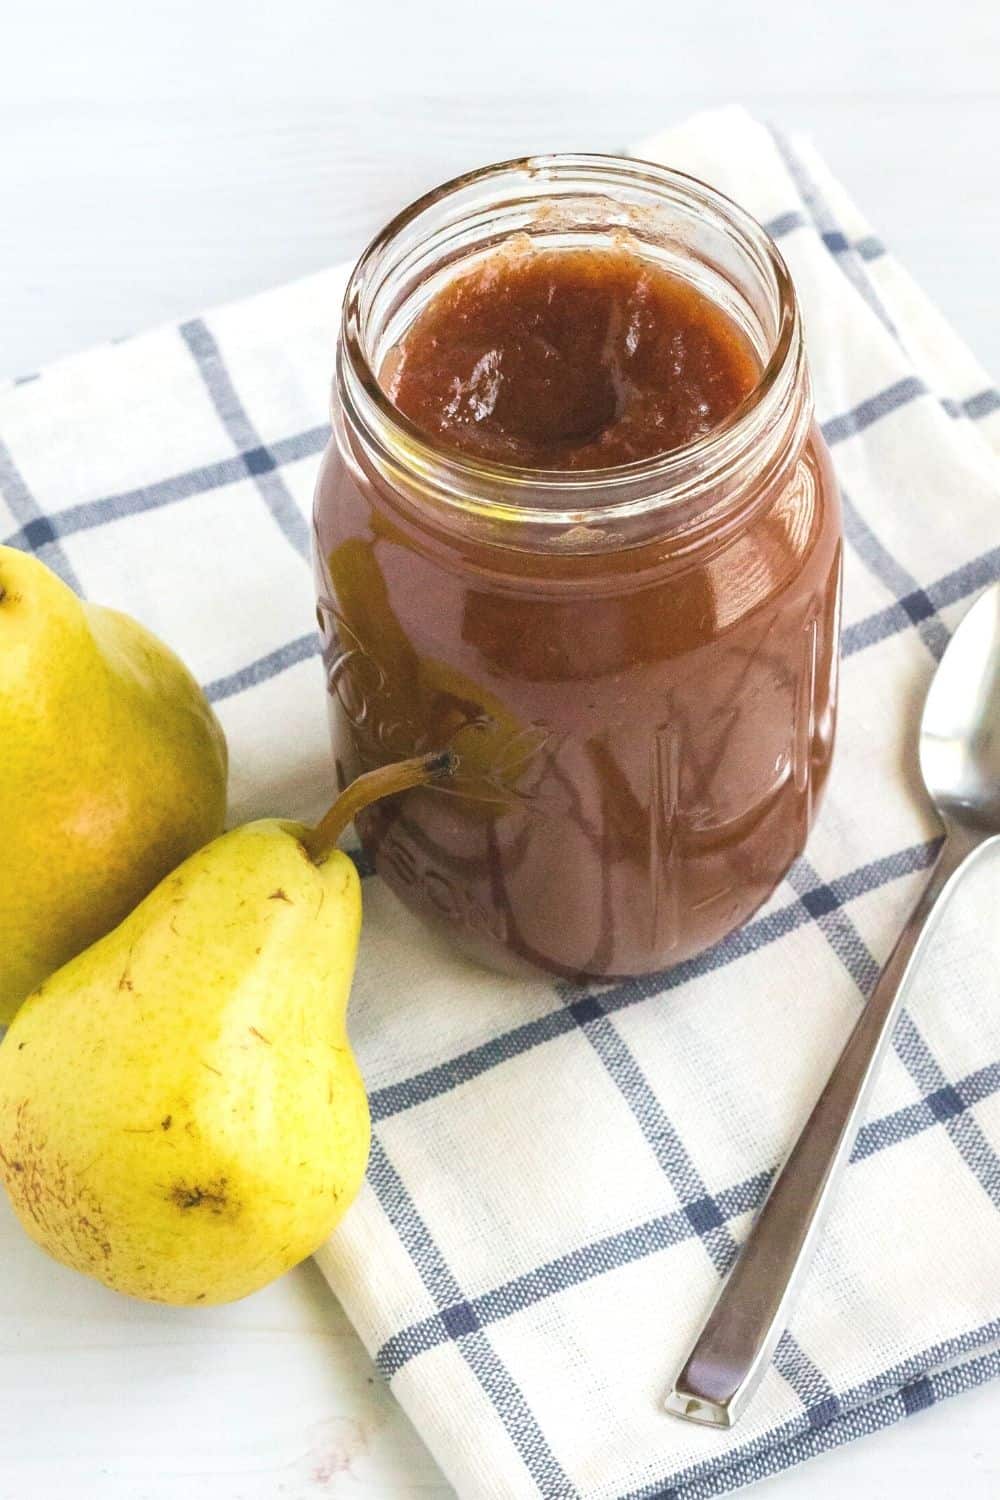 a jar of pear butter on a blue and white checked napkin, with a spoon and two fresh pears next to it.